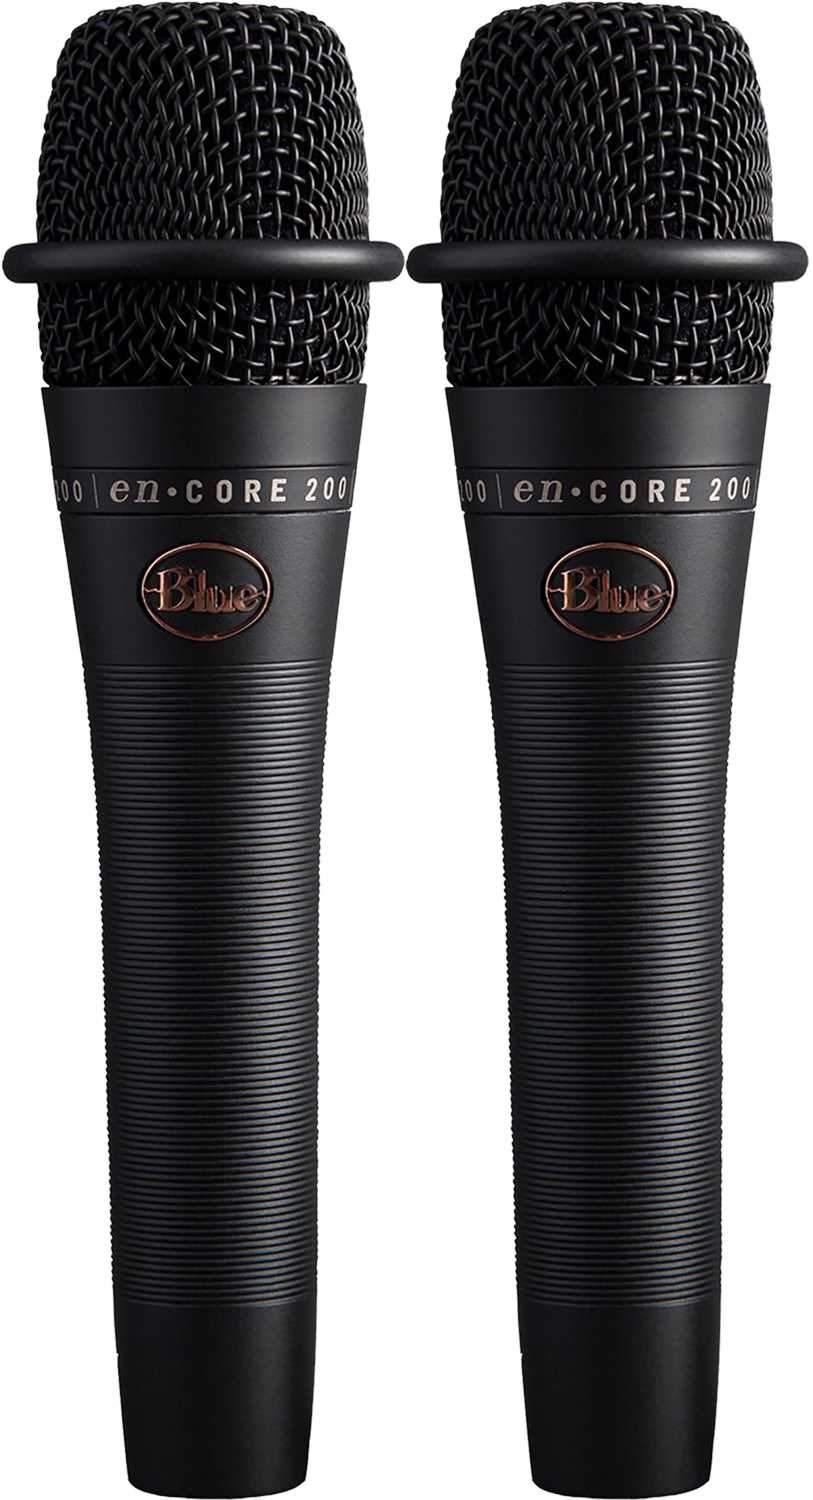 Blue enCore 200 Active Dynamic Microphone Pair - PSSL ProSound and Stage Lighting